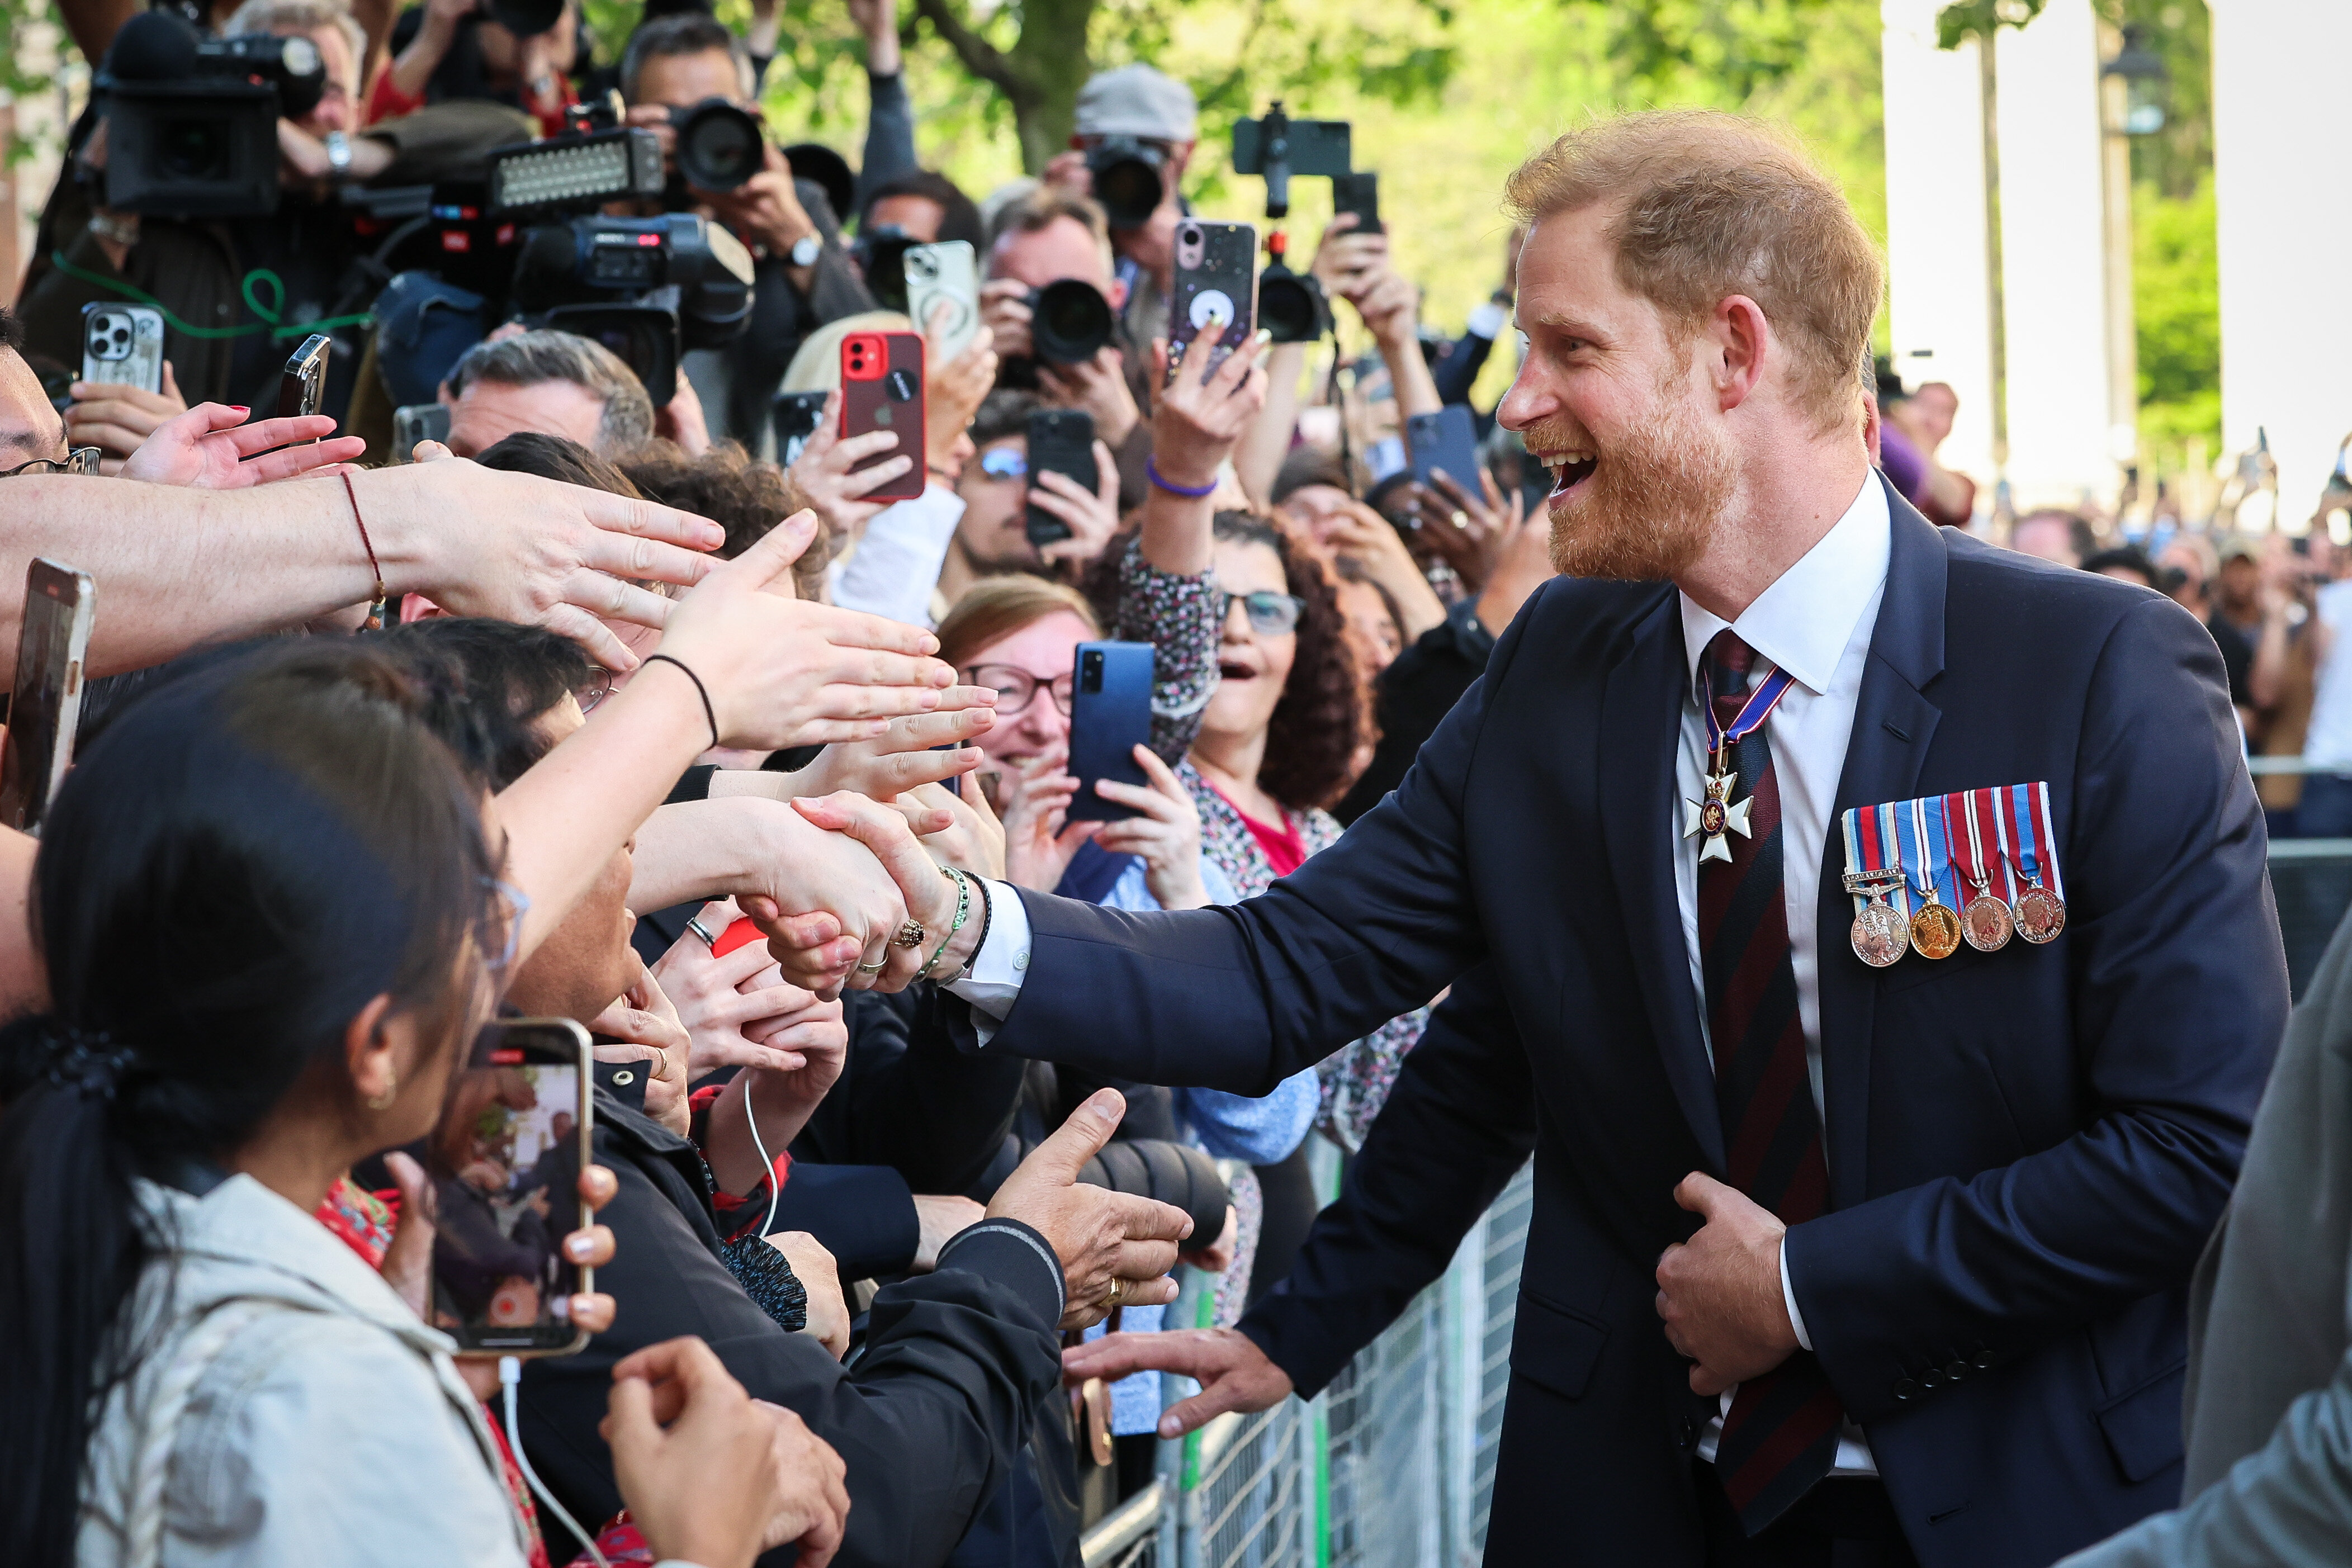 Prince Harry smiling, shaking hands with fans behind a barrier, at a public event